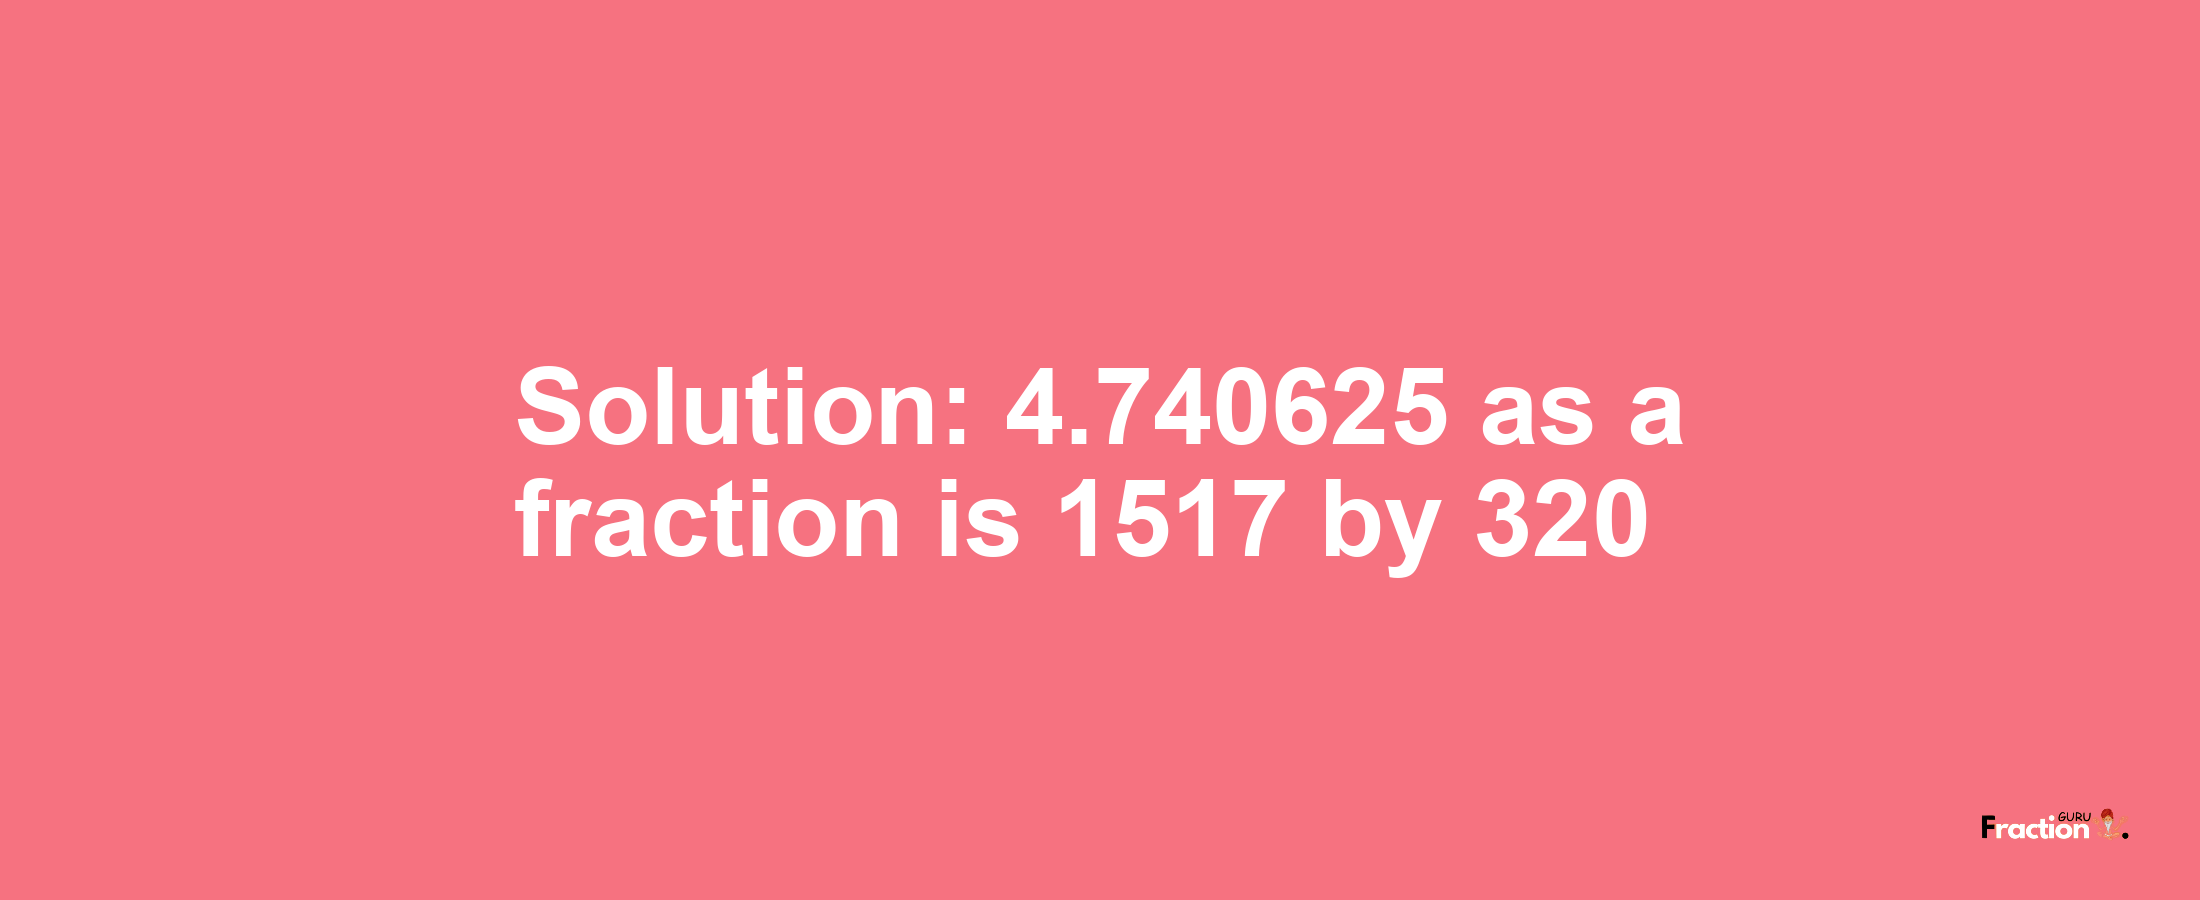 Solution:4.740625 as a fraction is 1517/320